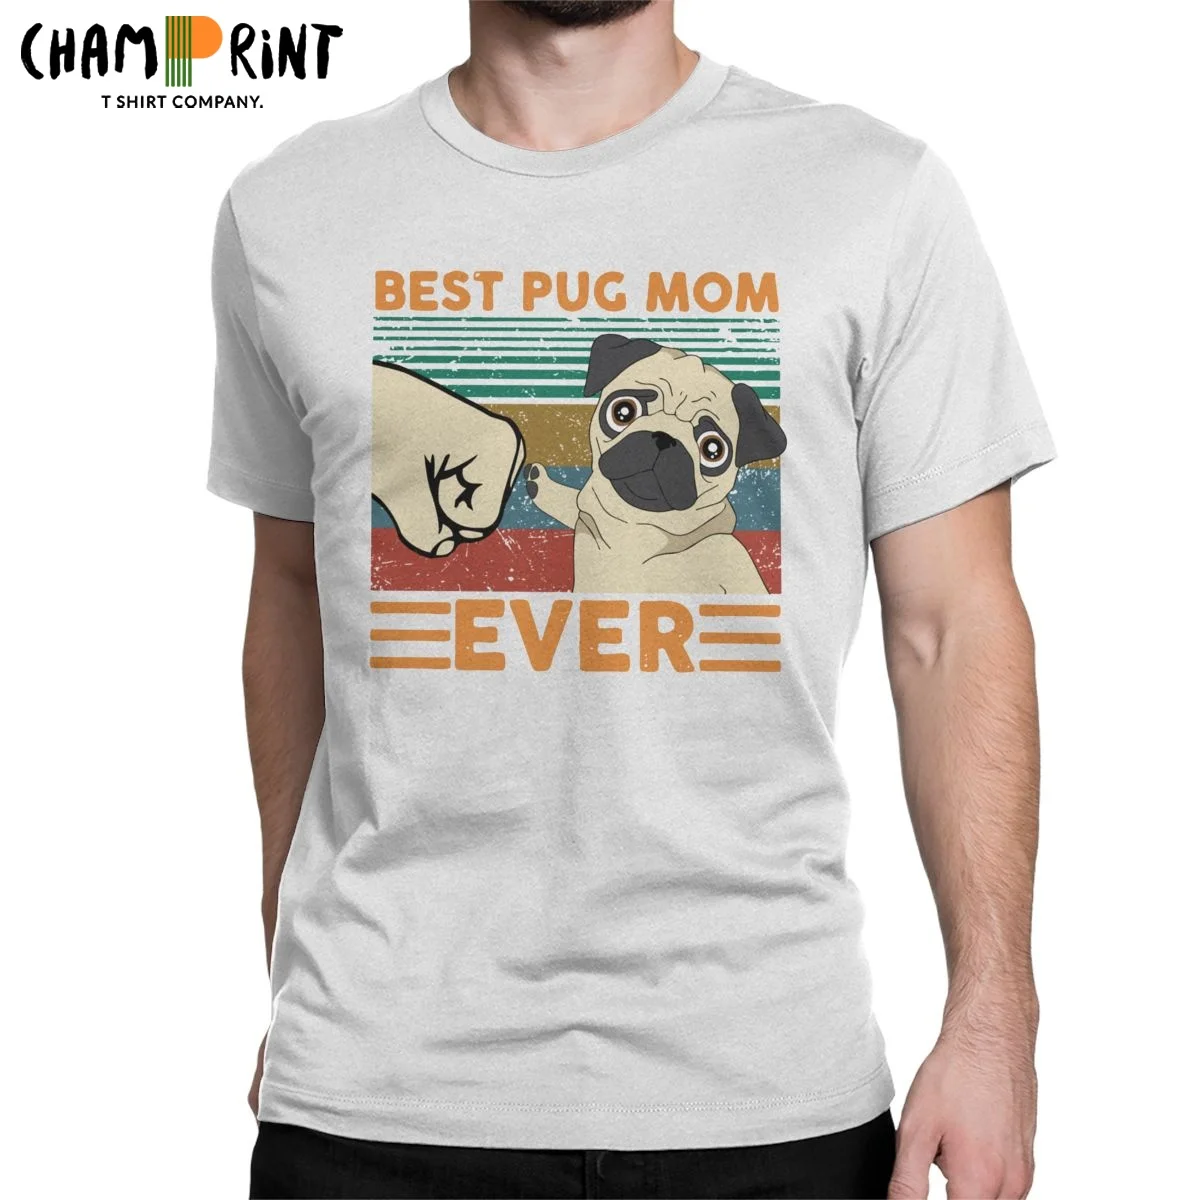 

Best PUG MOM Ever French Bulldog T Shirts for Men Pure Cotton Novelty T-Shirt Round Collar Dog Lover Tees Tops Gift Idea